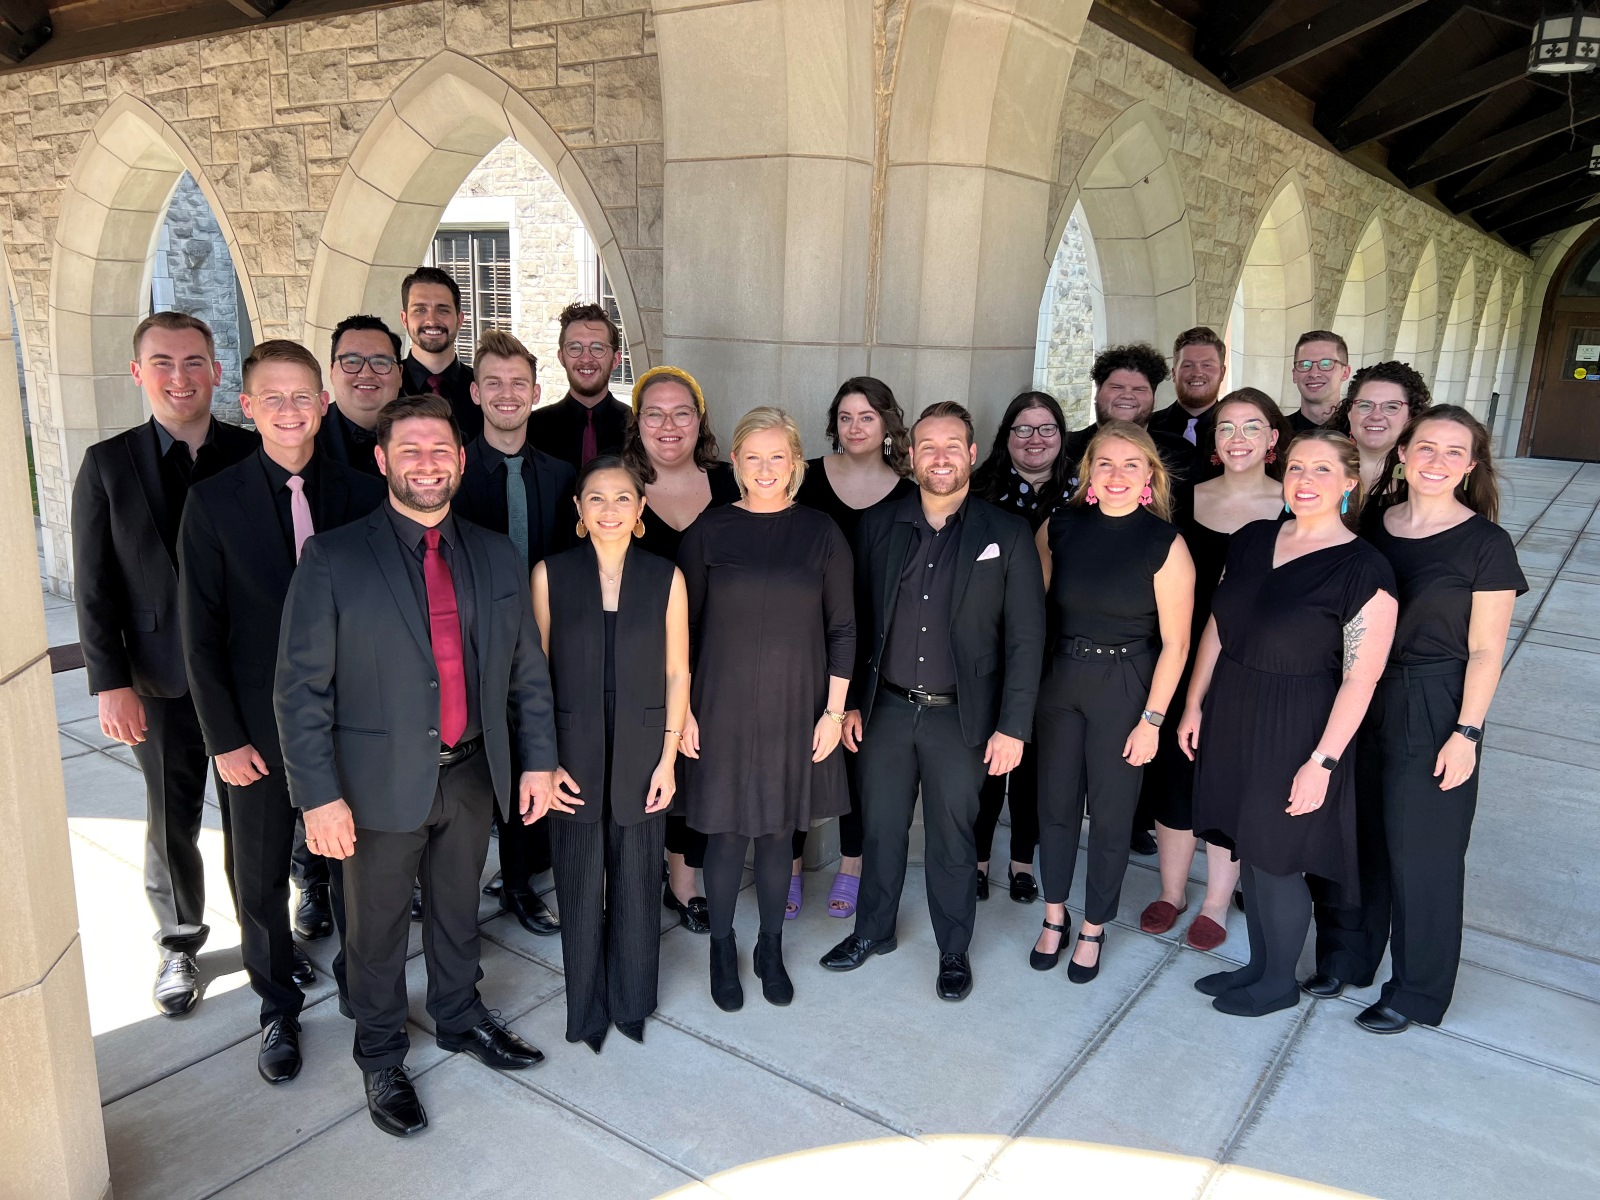 Members of Queen City Chorale pose for a photo outside Christ Episcopal Church in Springfield, Missouri